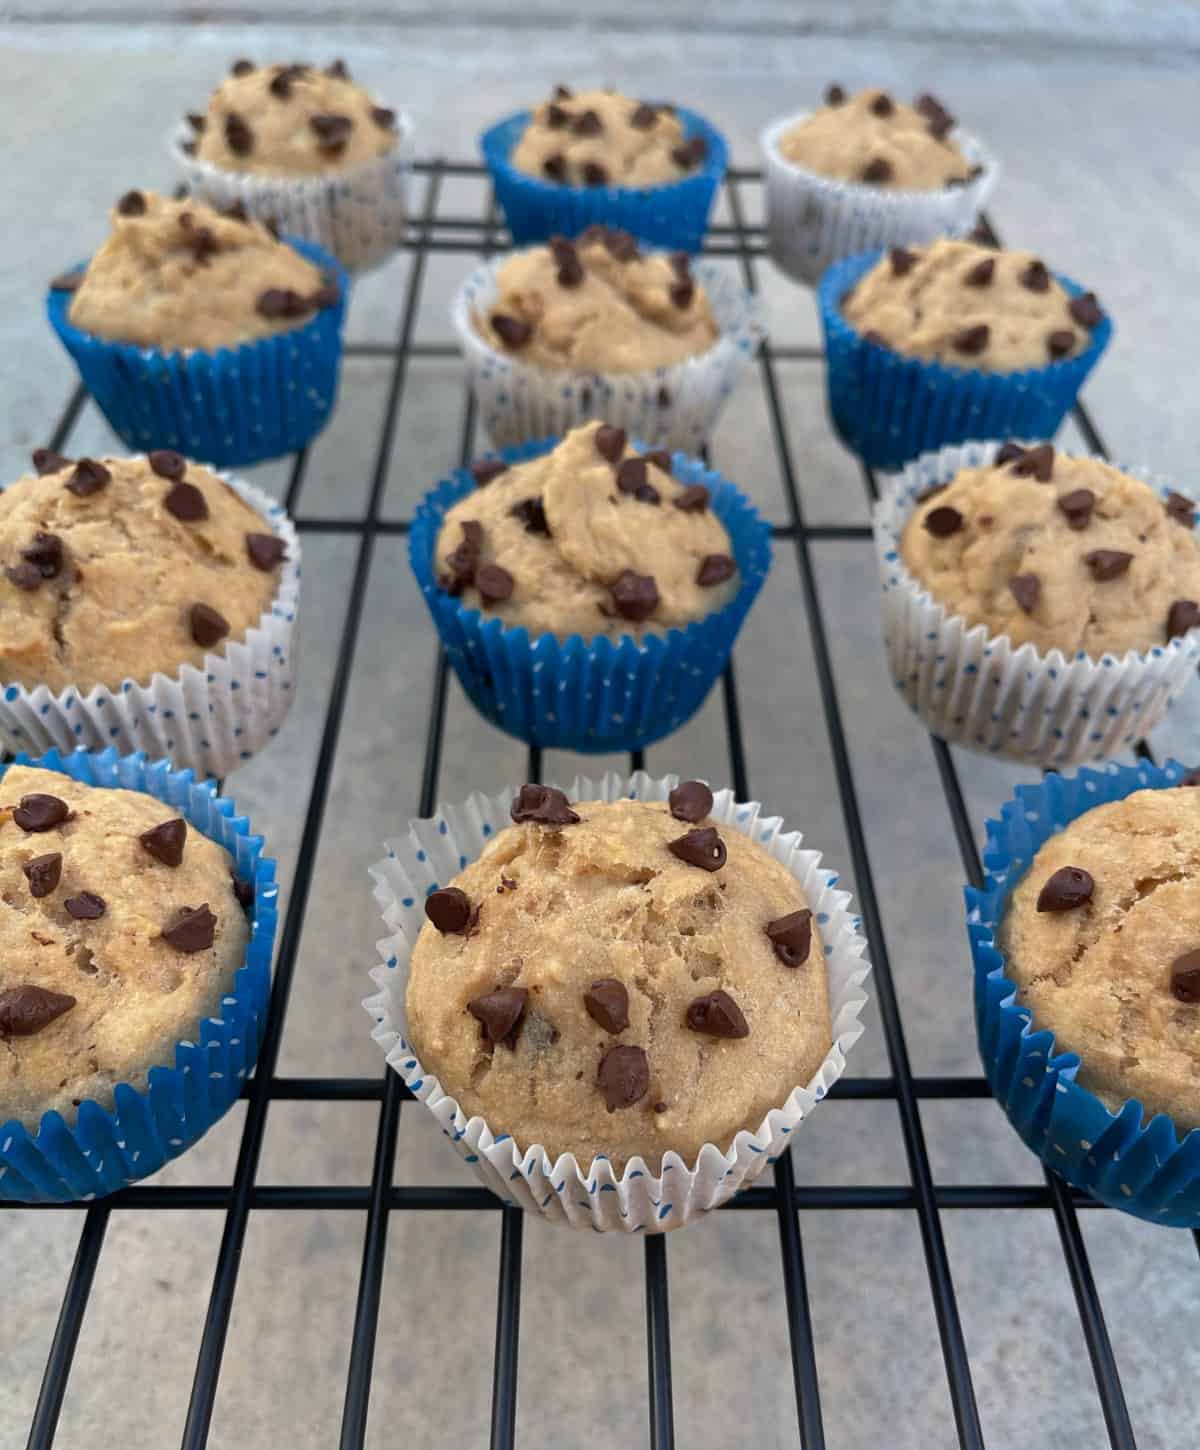 Banana chocolate chip pancake muffins in blue and white paper liners cooling on wire rack.